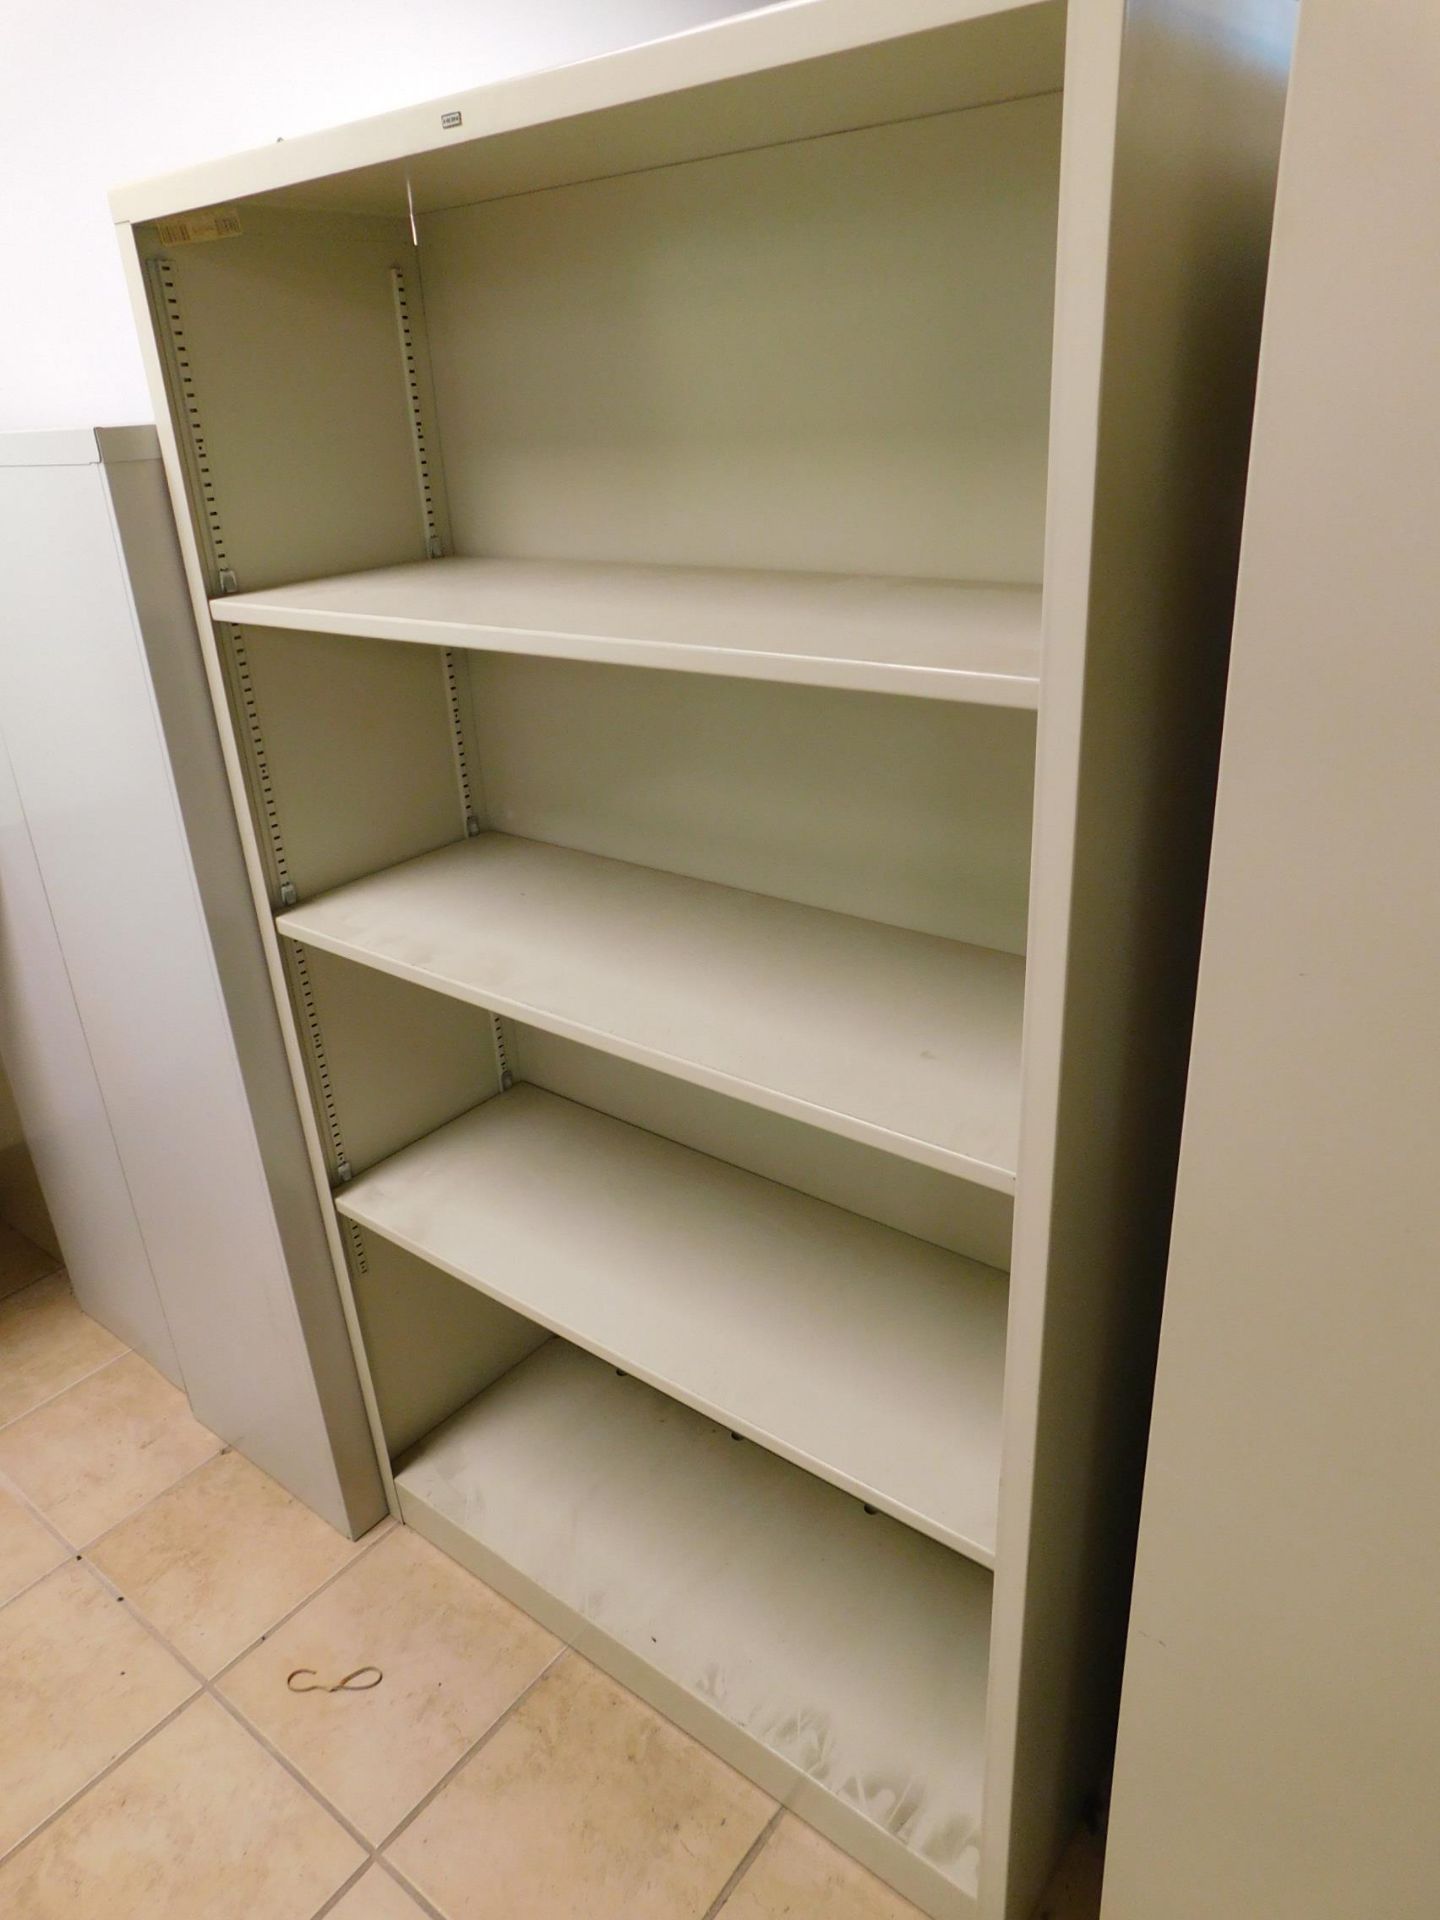 (2) 4-Drawer File Cabinets and (3) Metal Bookshelves - Image 3 of 3